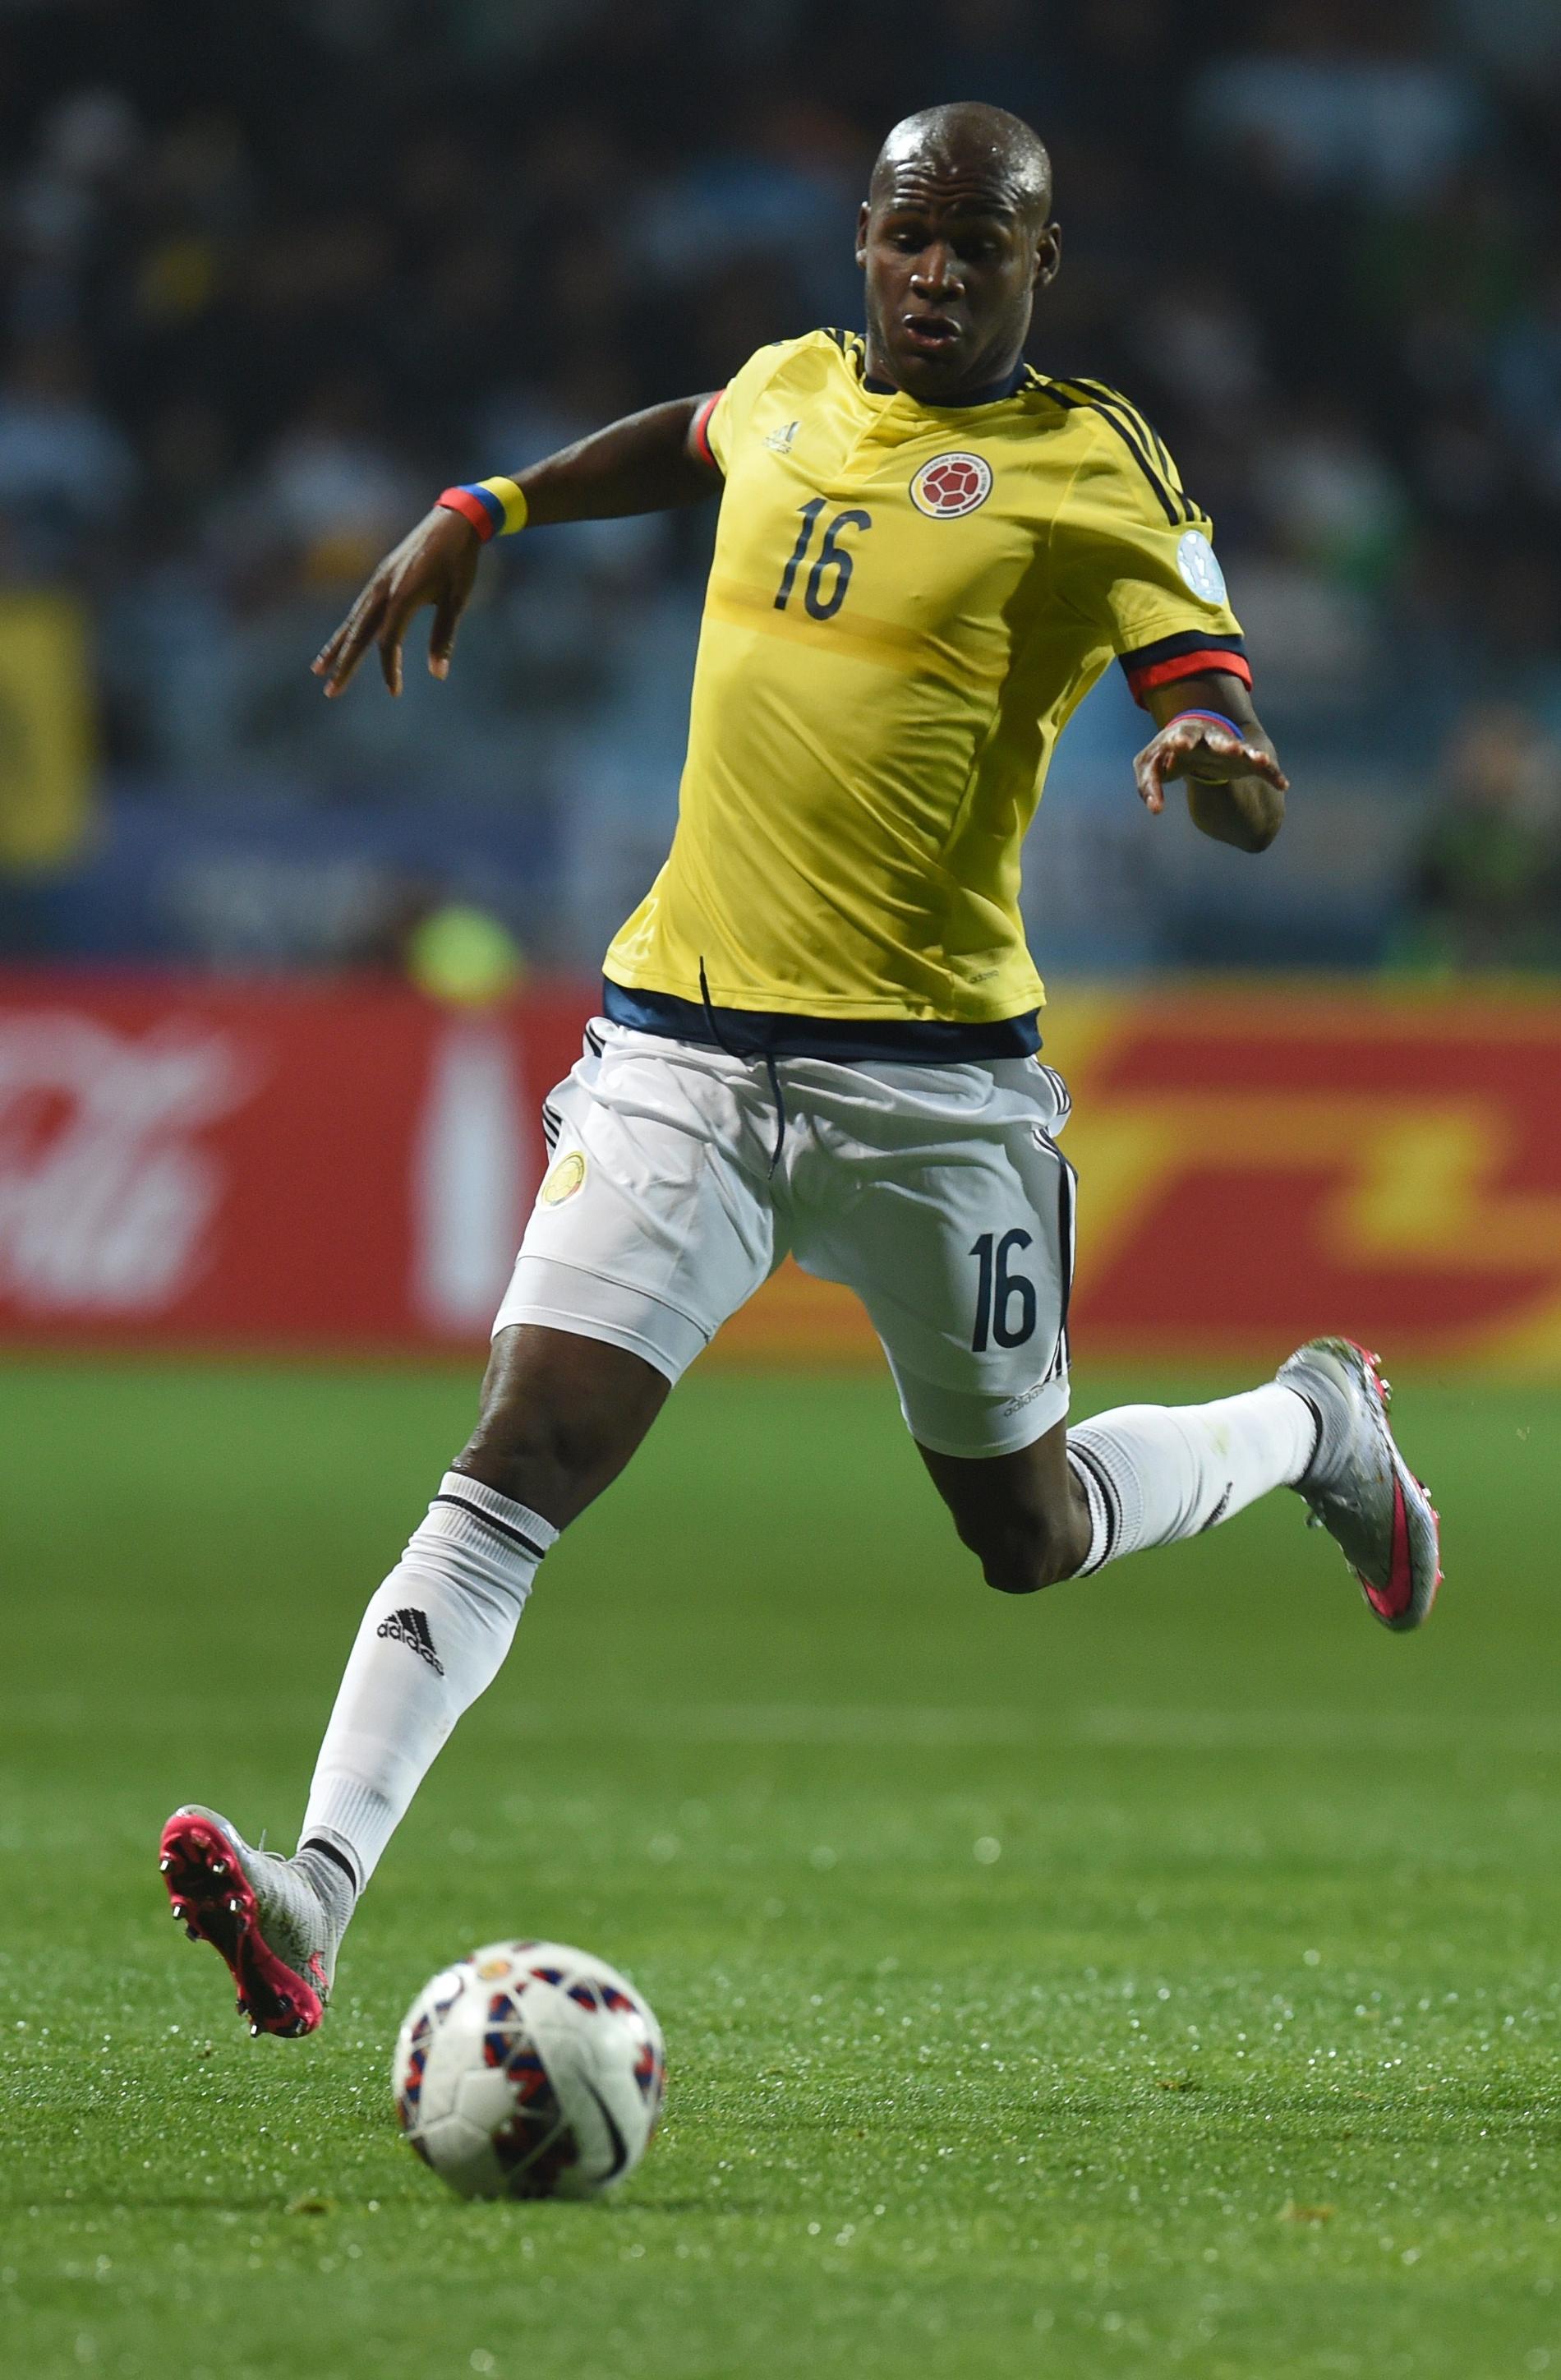 Victor Ibarbo.